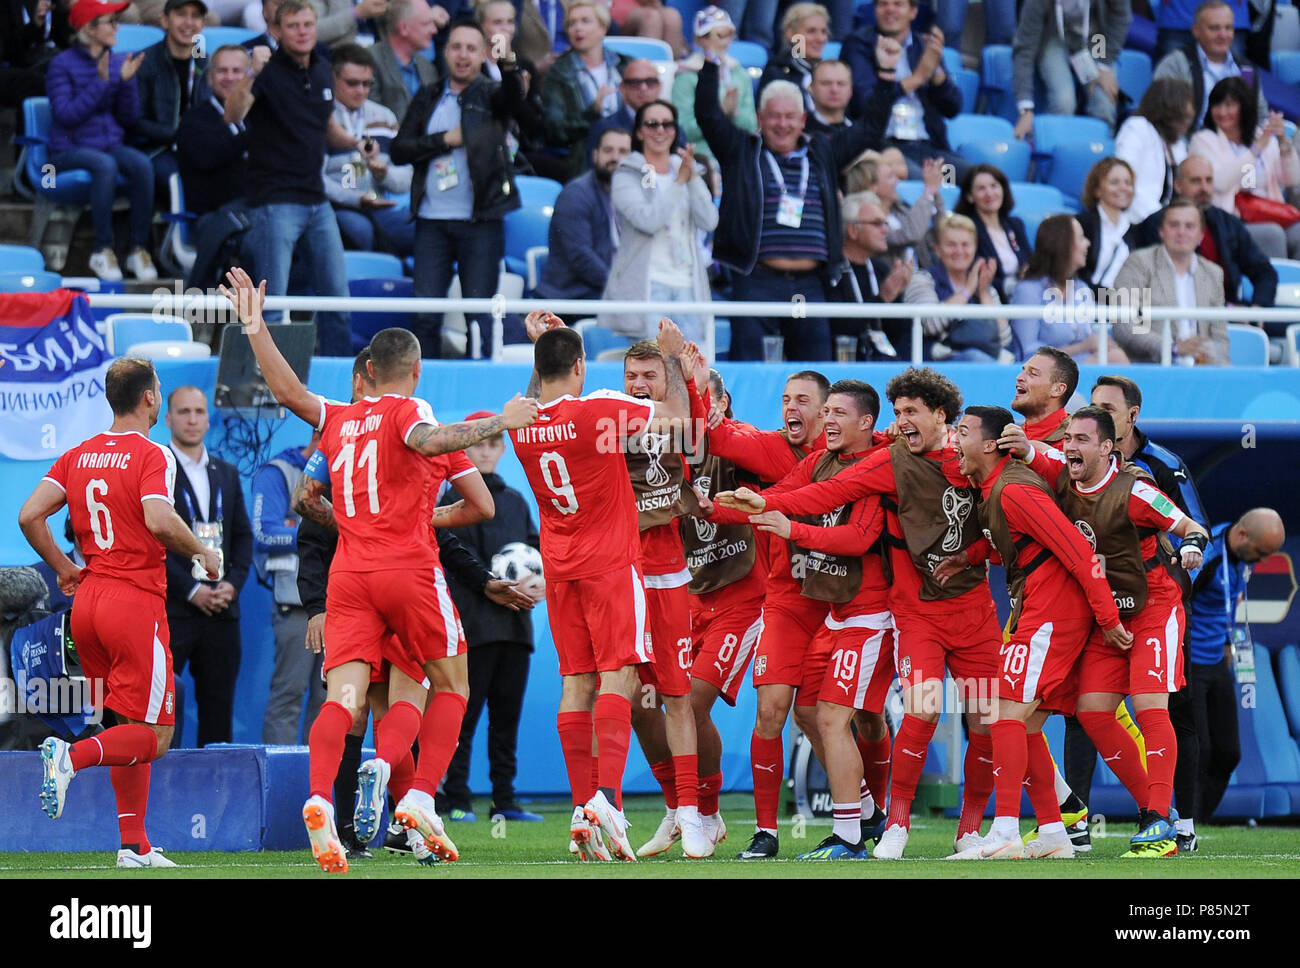 KALININGRAD, RUSSIA - JUNE 22: Aleksandar Mitrovic of Serbia celebrates scoring the goal with team mates during the 2018 FIFA World Cup Russia group E match between Serbia and Switzerland at Kaliningrad Stadium on June 22, 2018 in Kaliningrad, Russia. (Photo by Norbert Barczyk/PressFocus/MB Media) Stock Photo